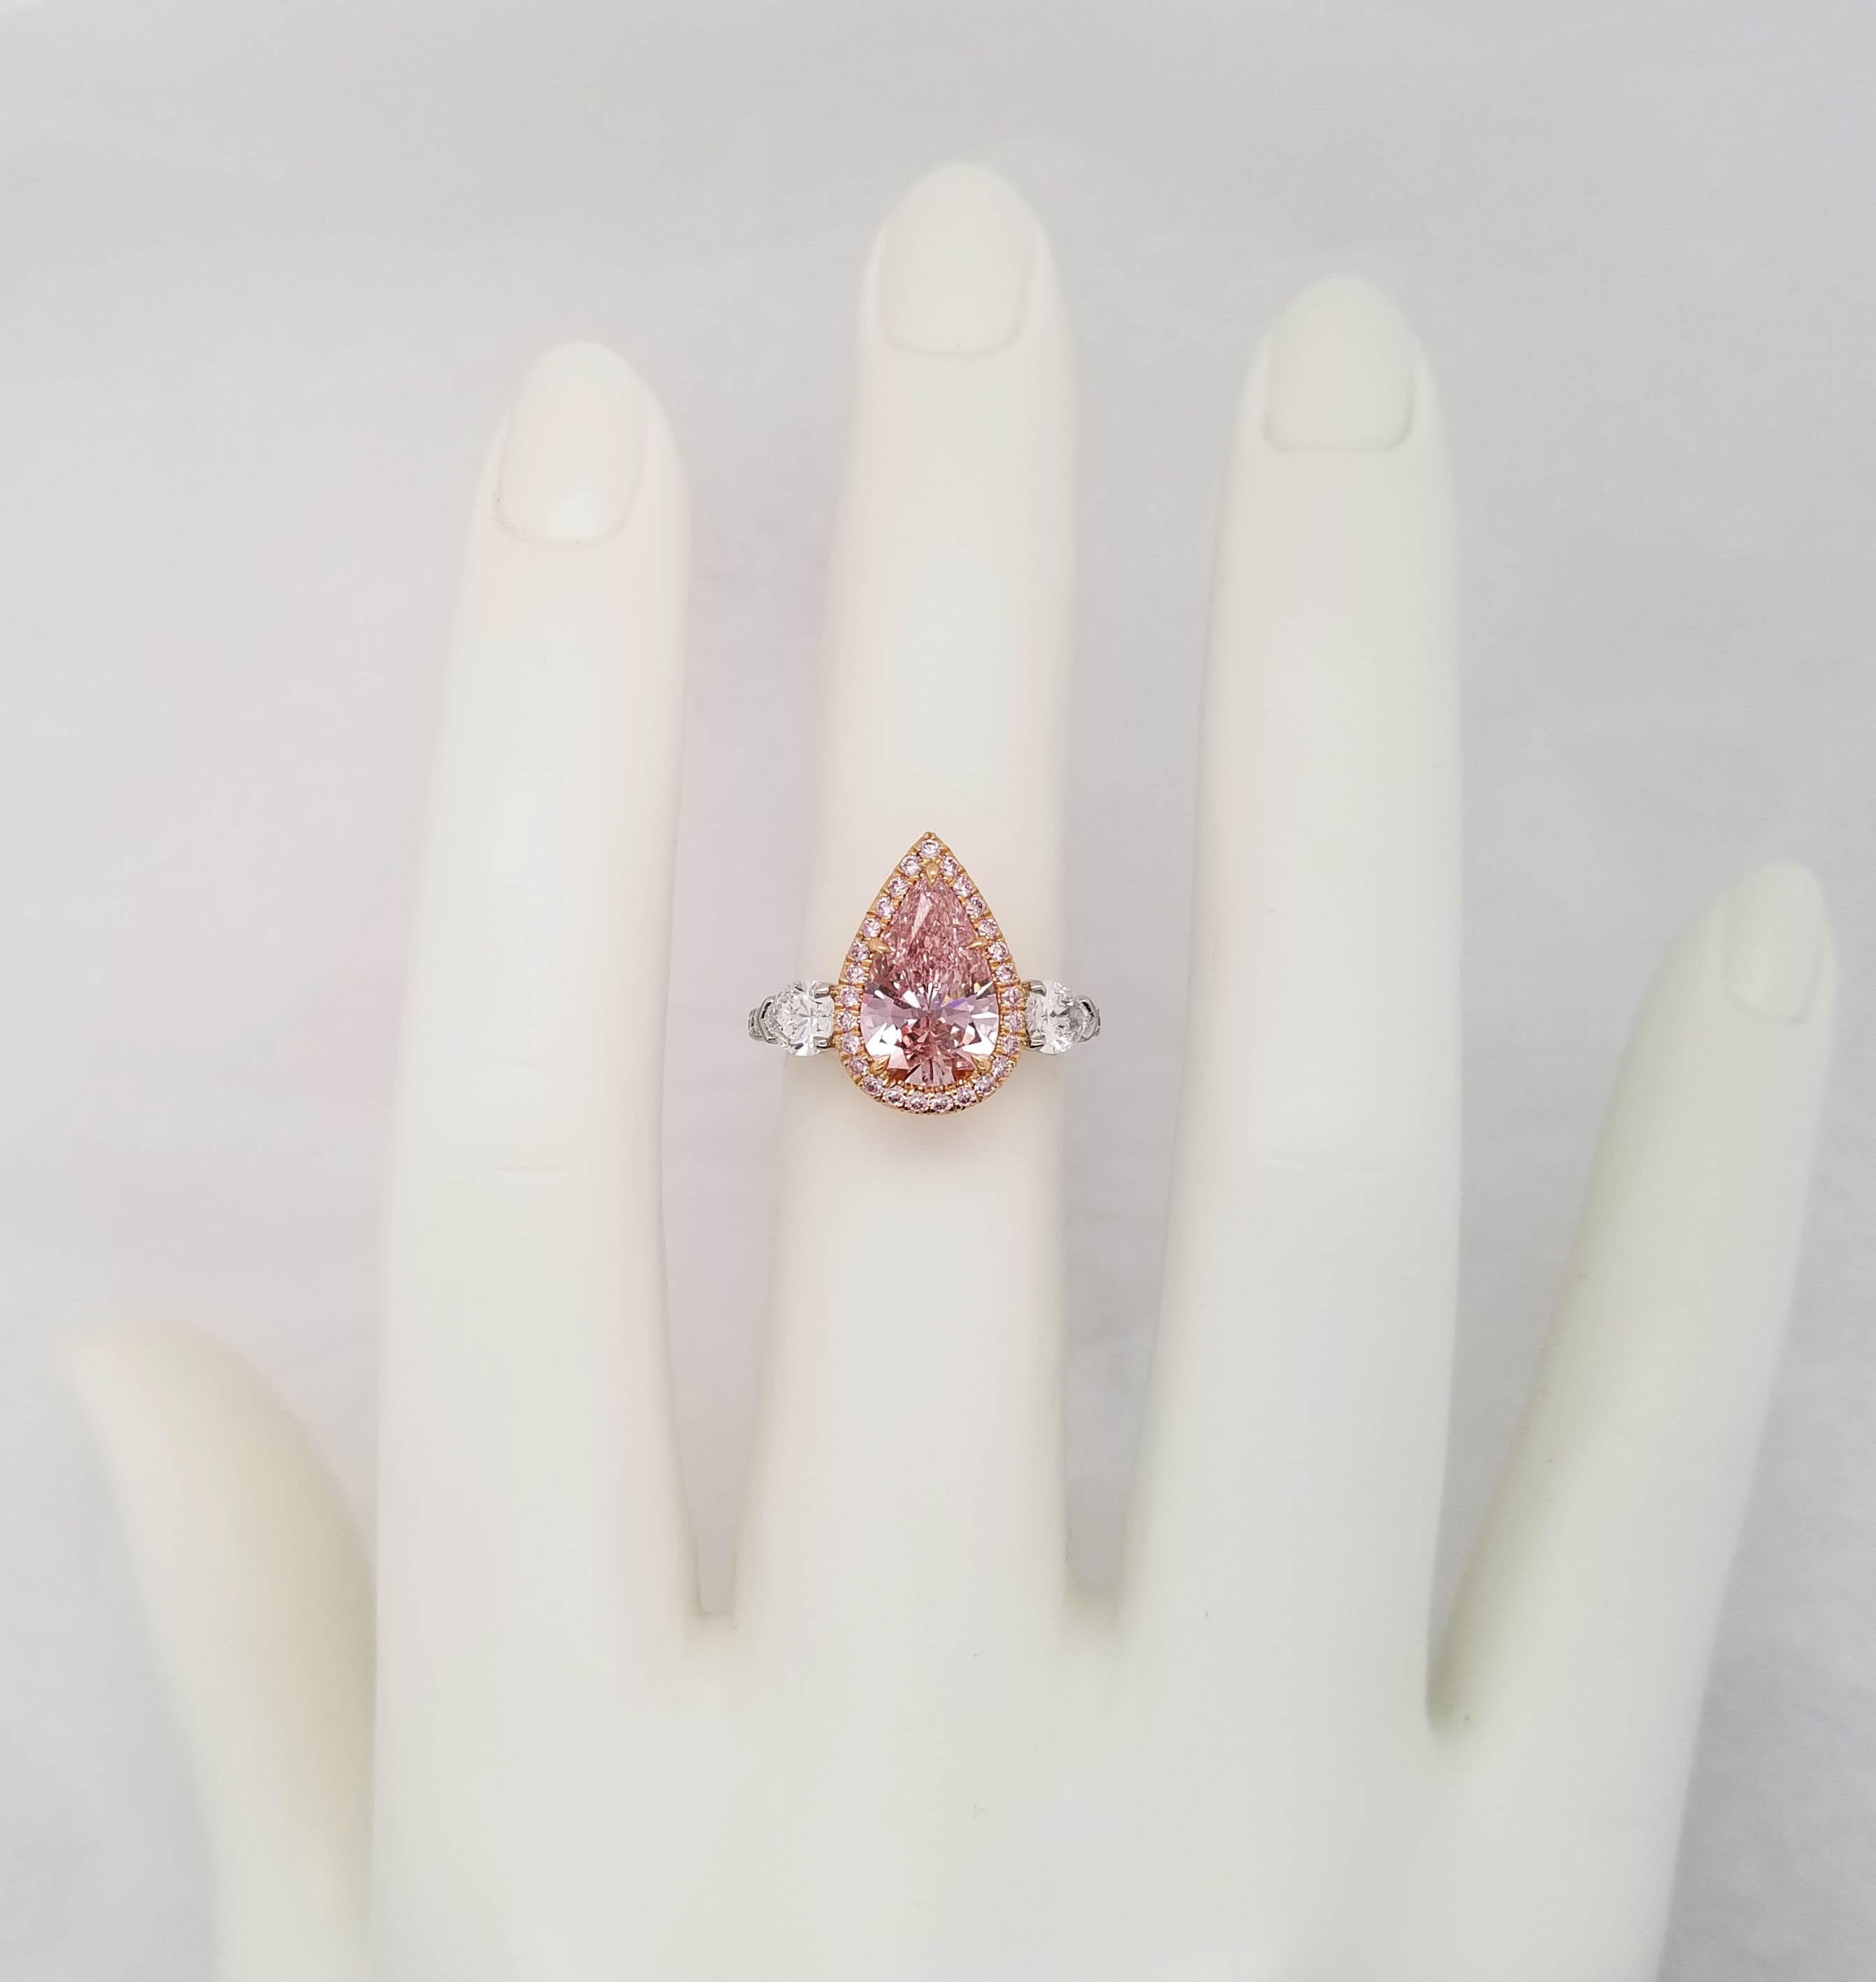 Contemporary Scarselli 2 Carat Pear Shape Pink Diamond Ring in Platinum and 18k Goldralds For Sale